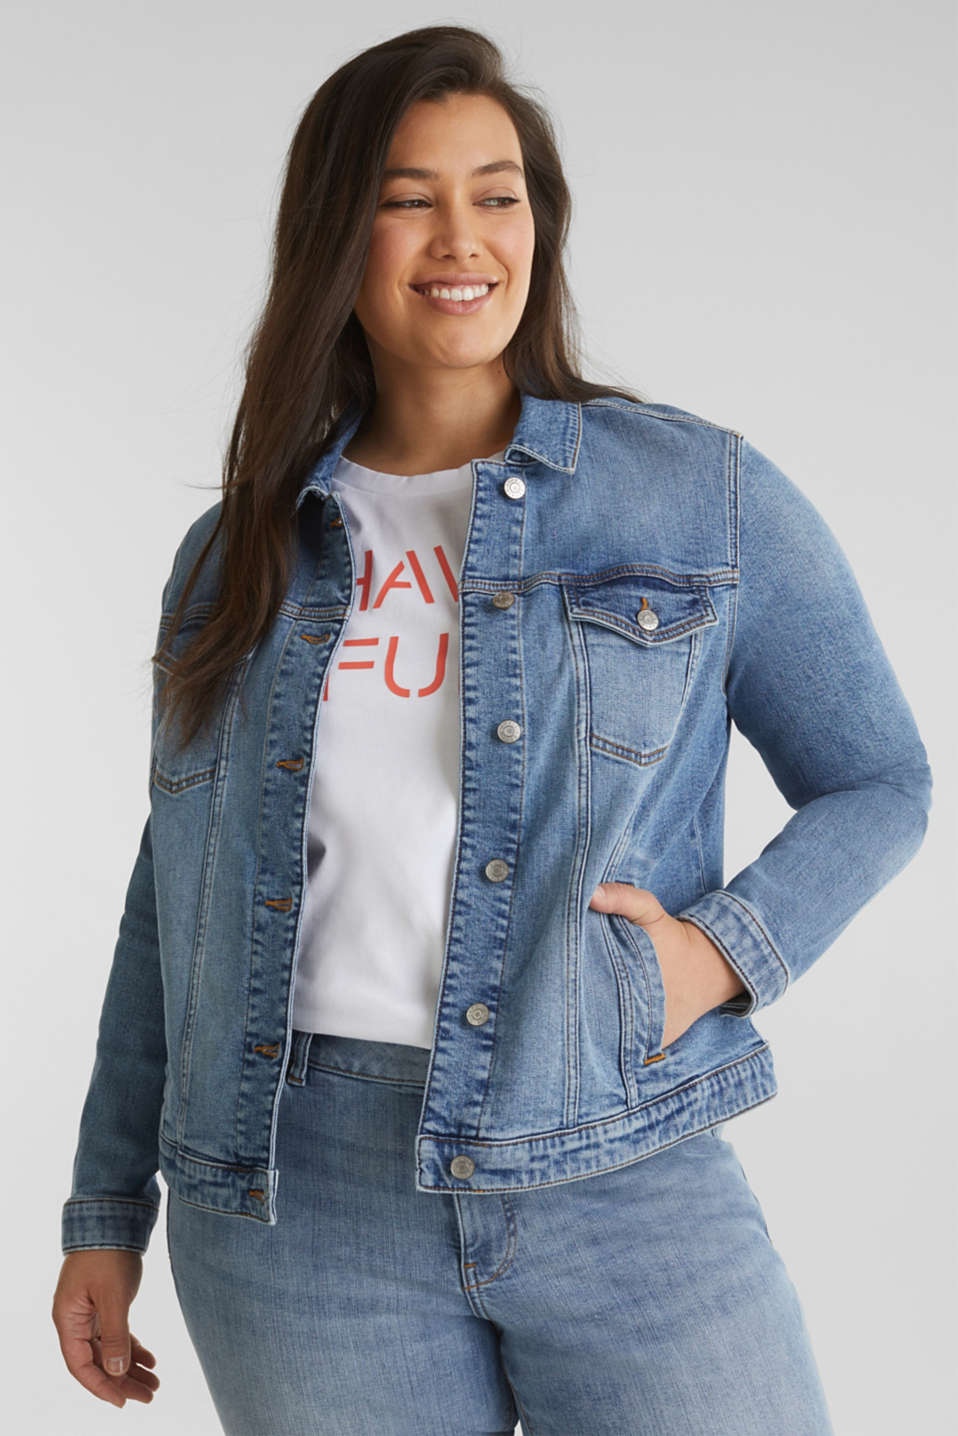 Esprit - CURVY denim jacket in a basic style at our Online Shop